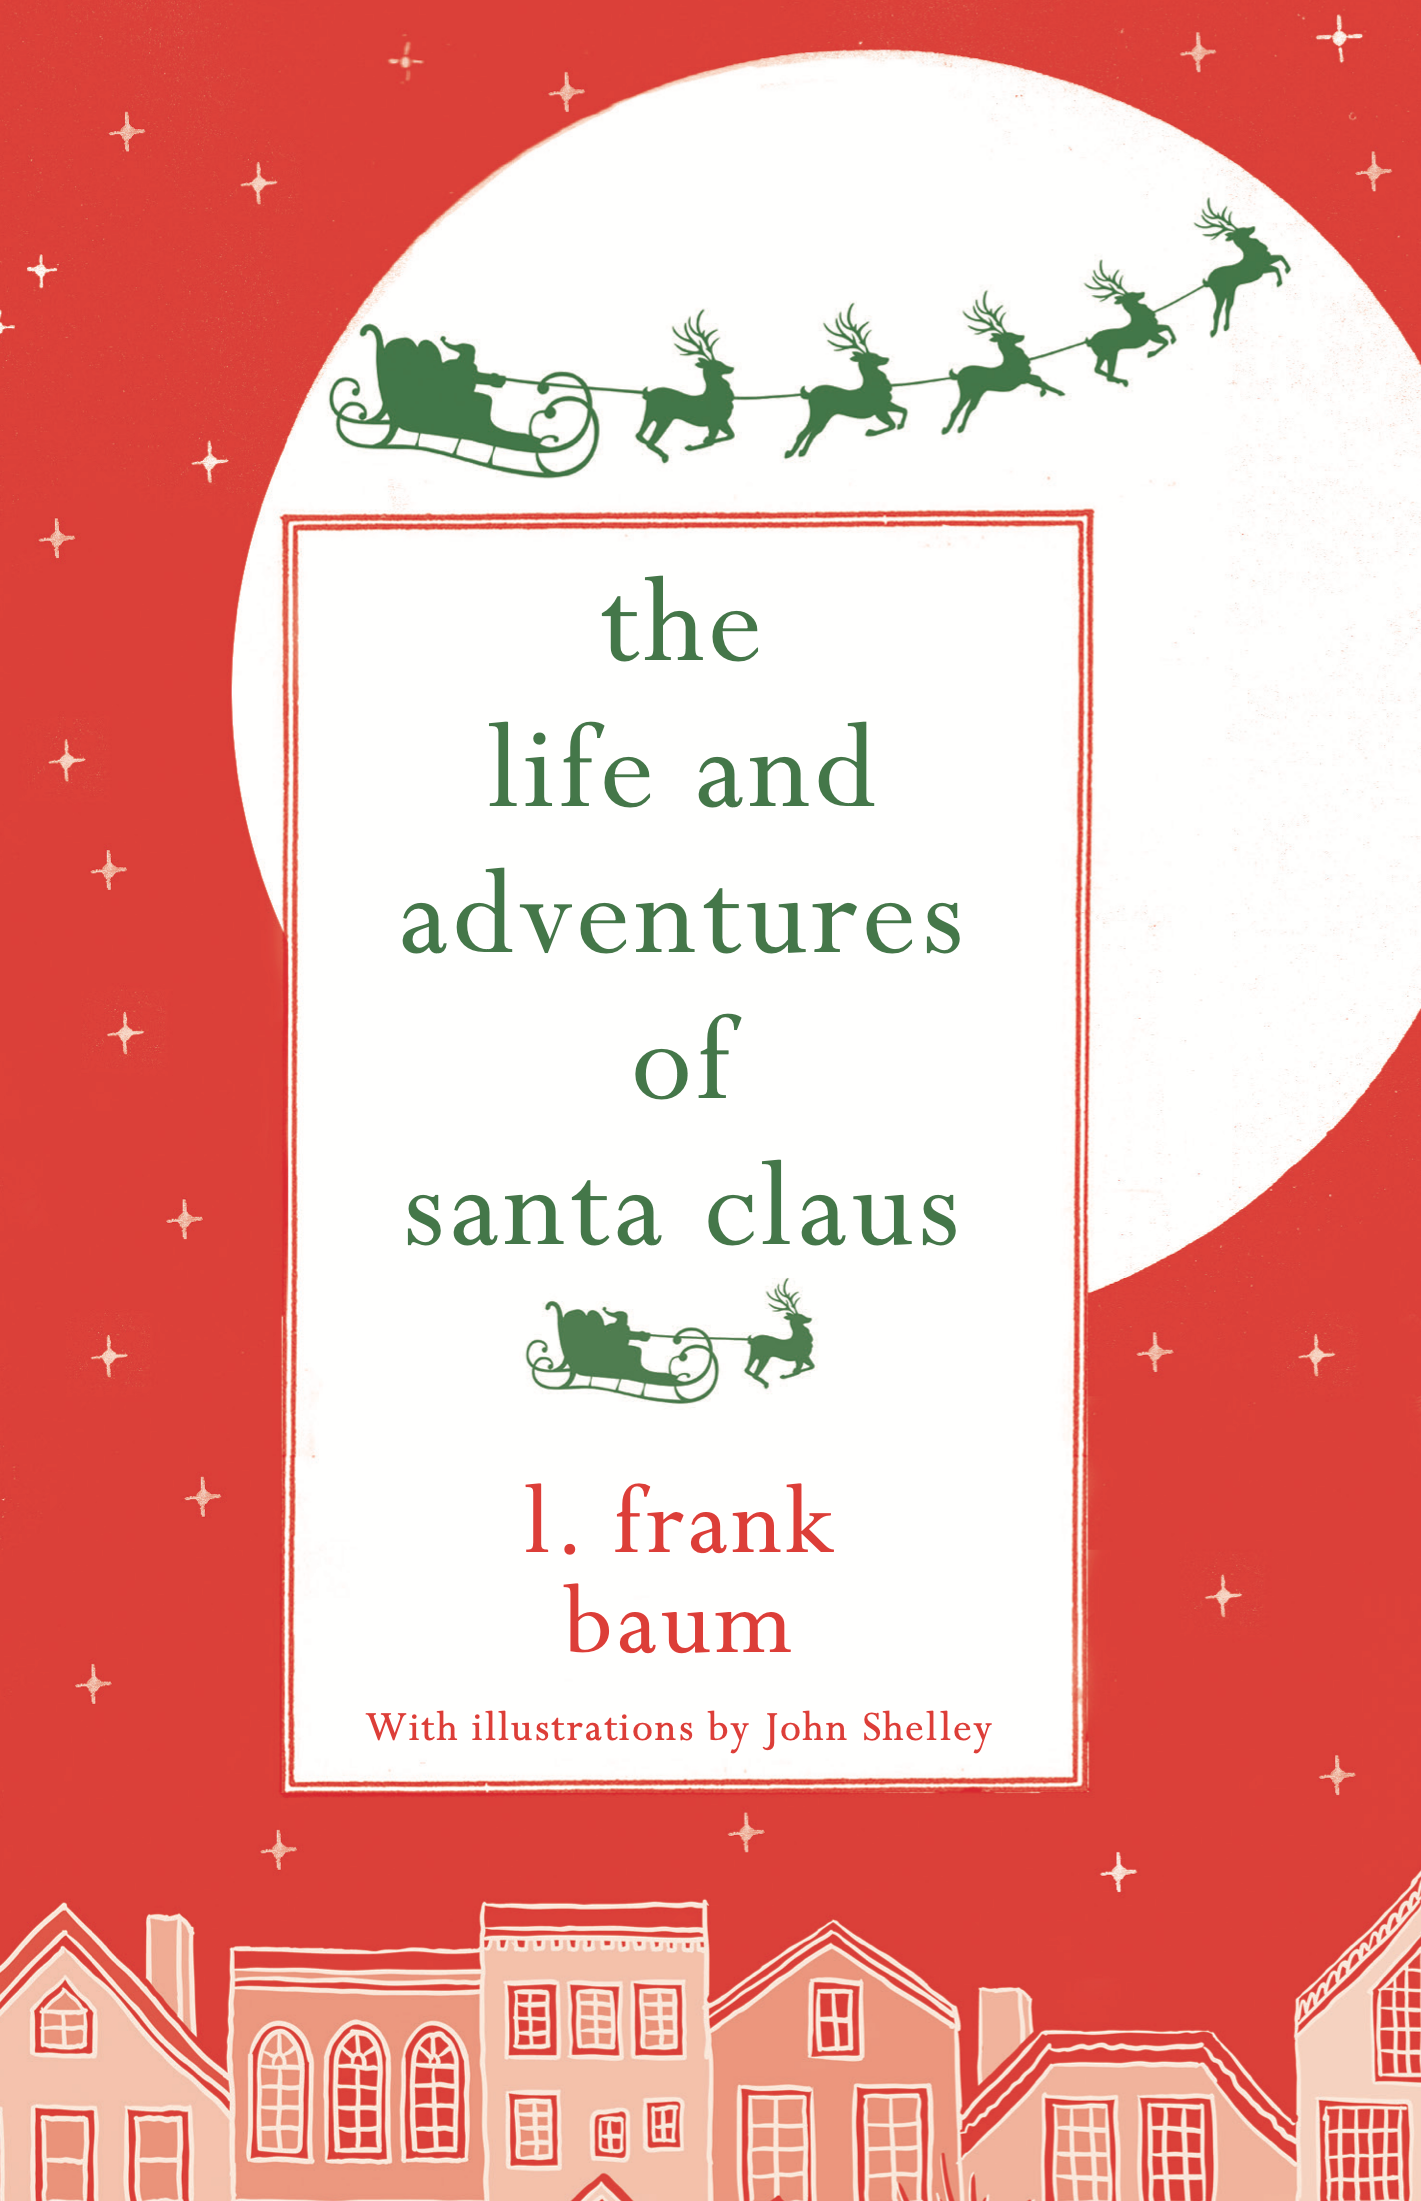 THE LIFE AND ADVENTURES OF SANTA